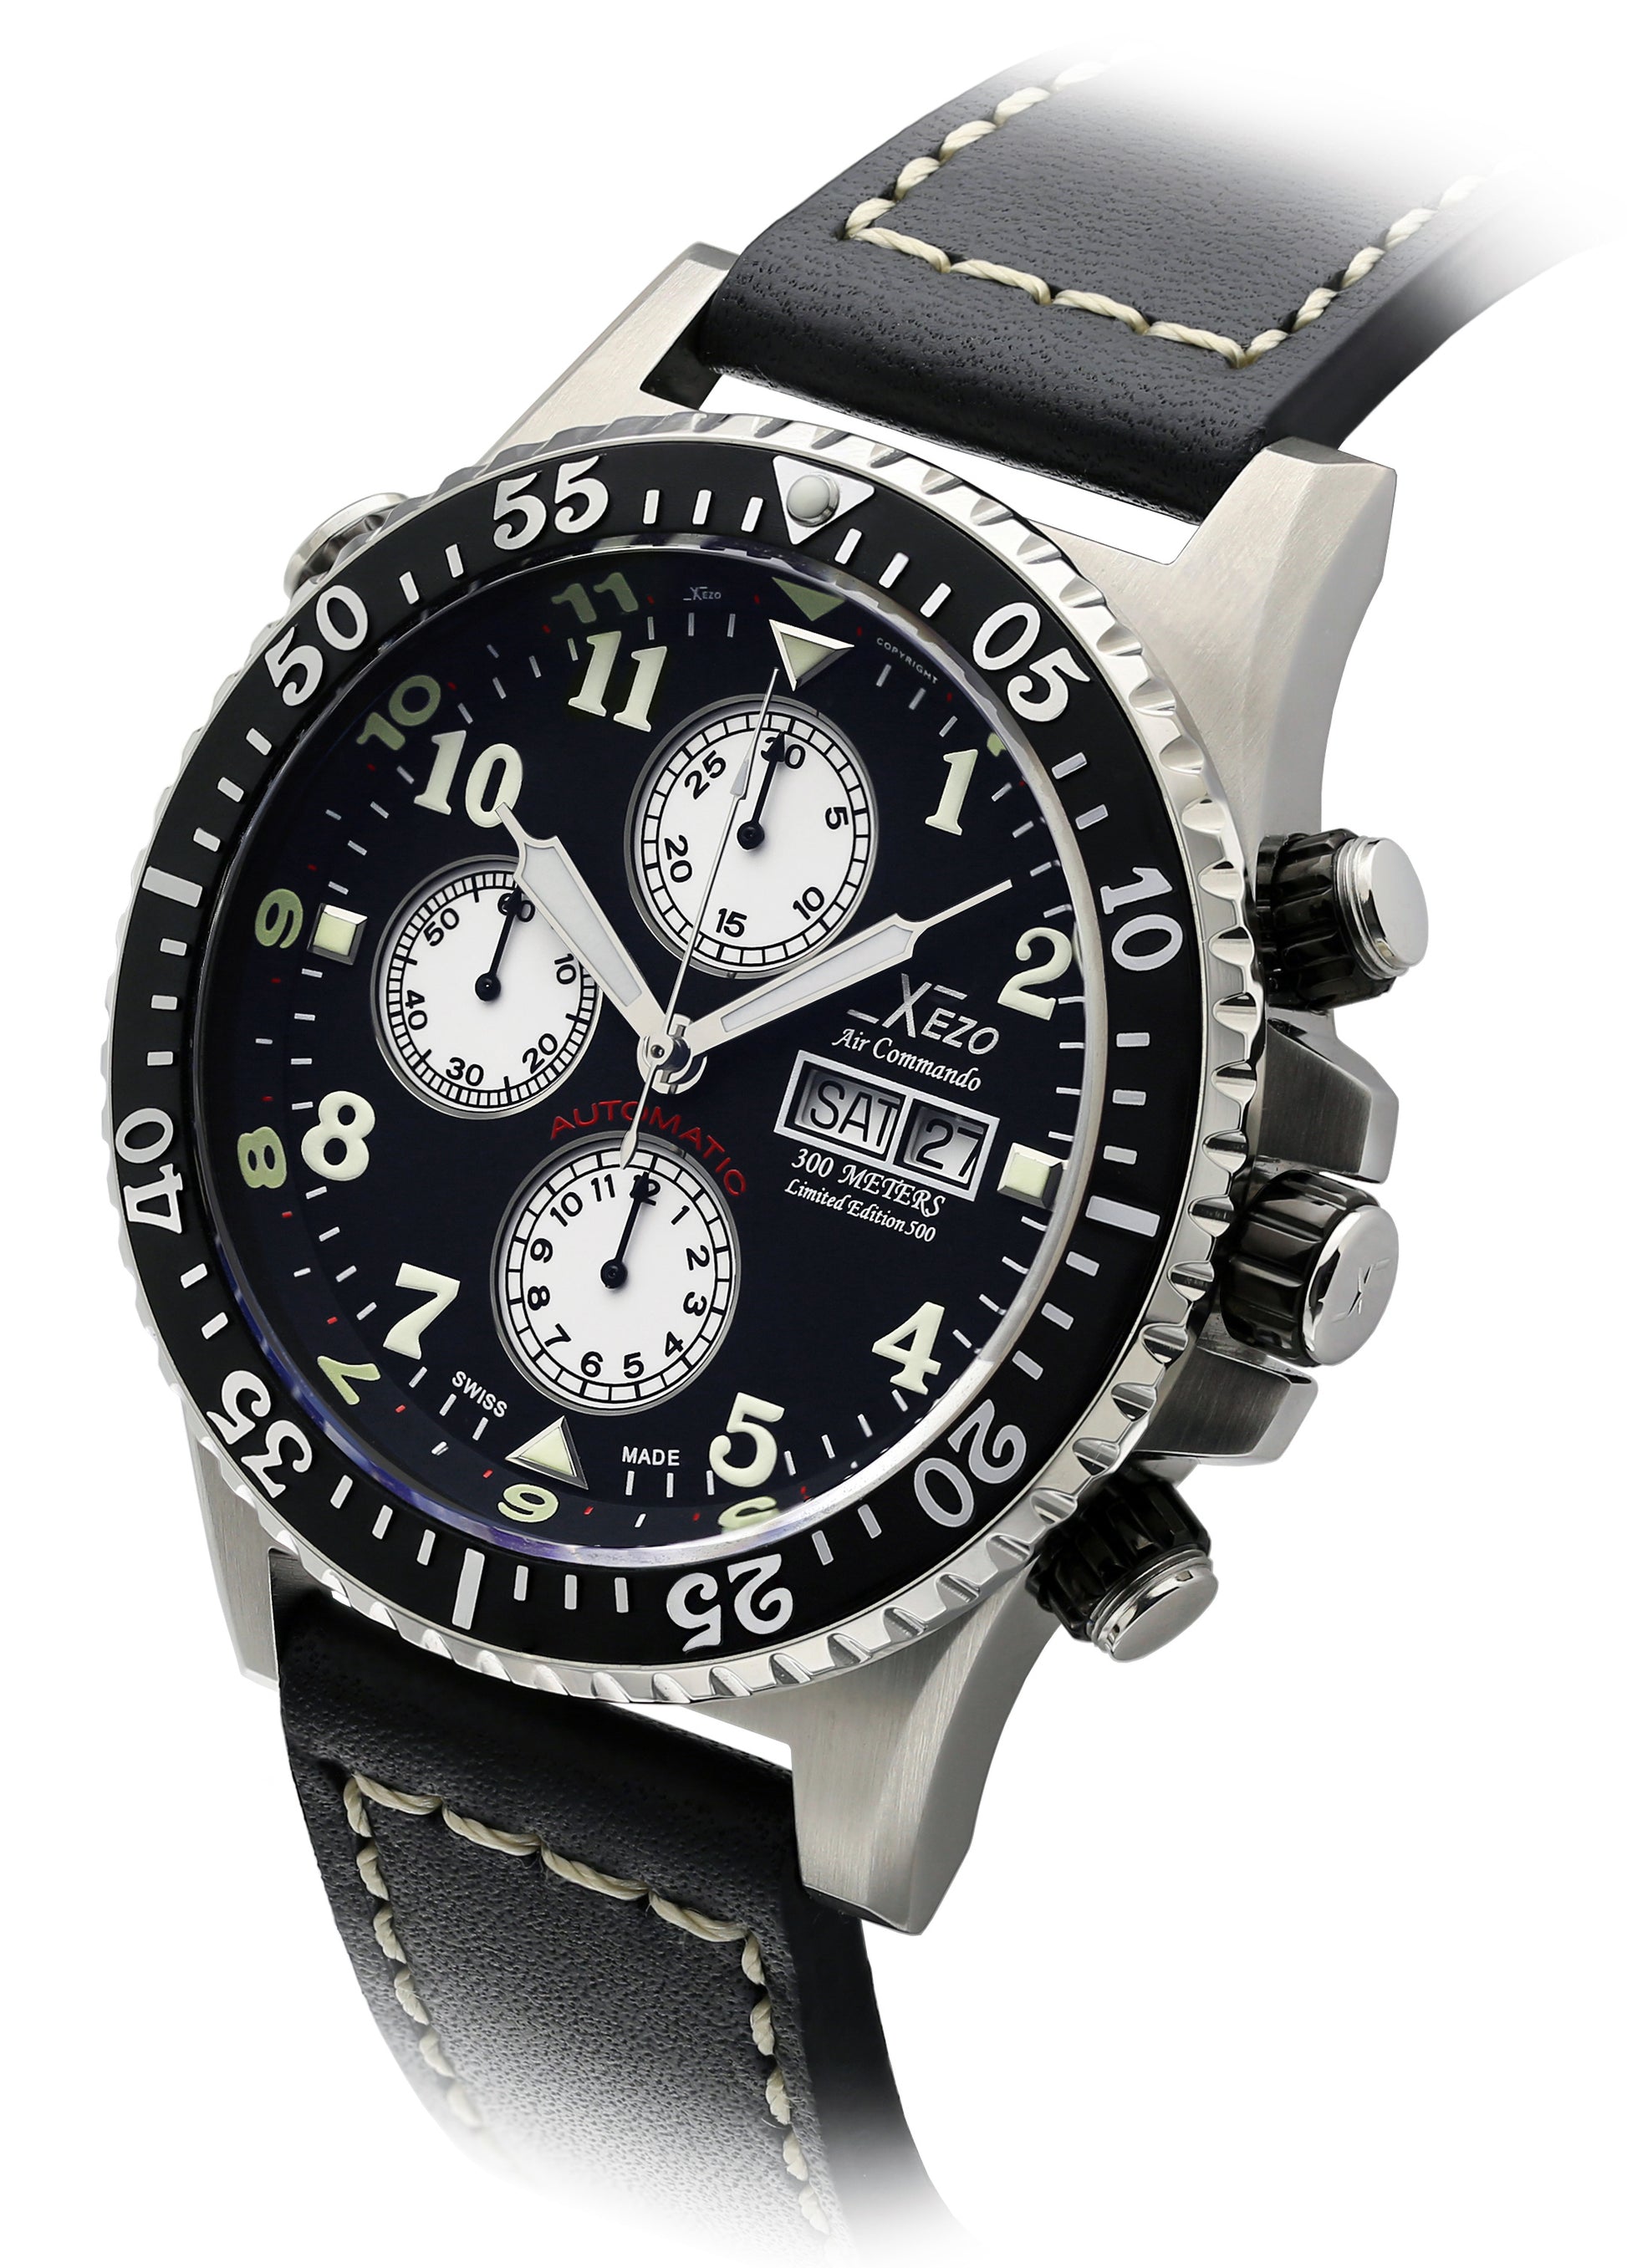 Xezo - Angled view of the front of the  Air Commando D45 7750-1 watch with black leather strap